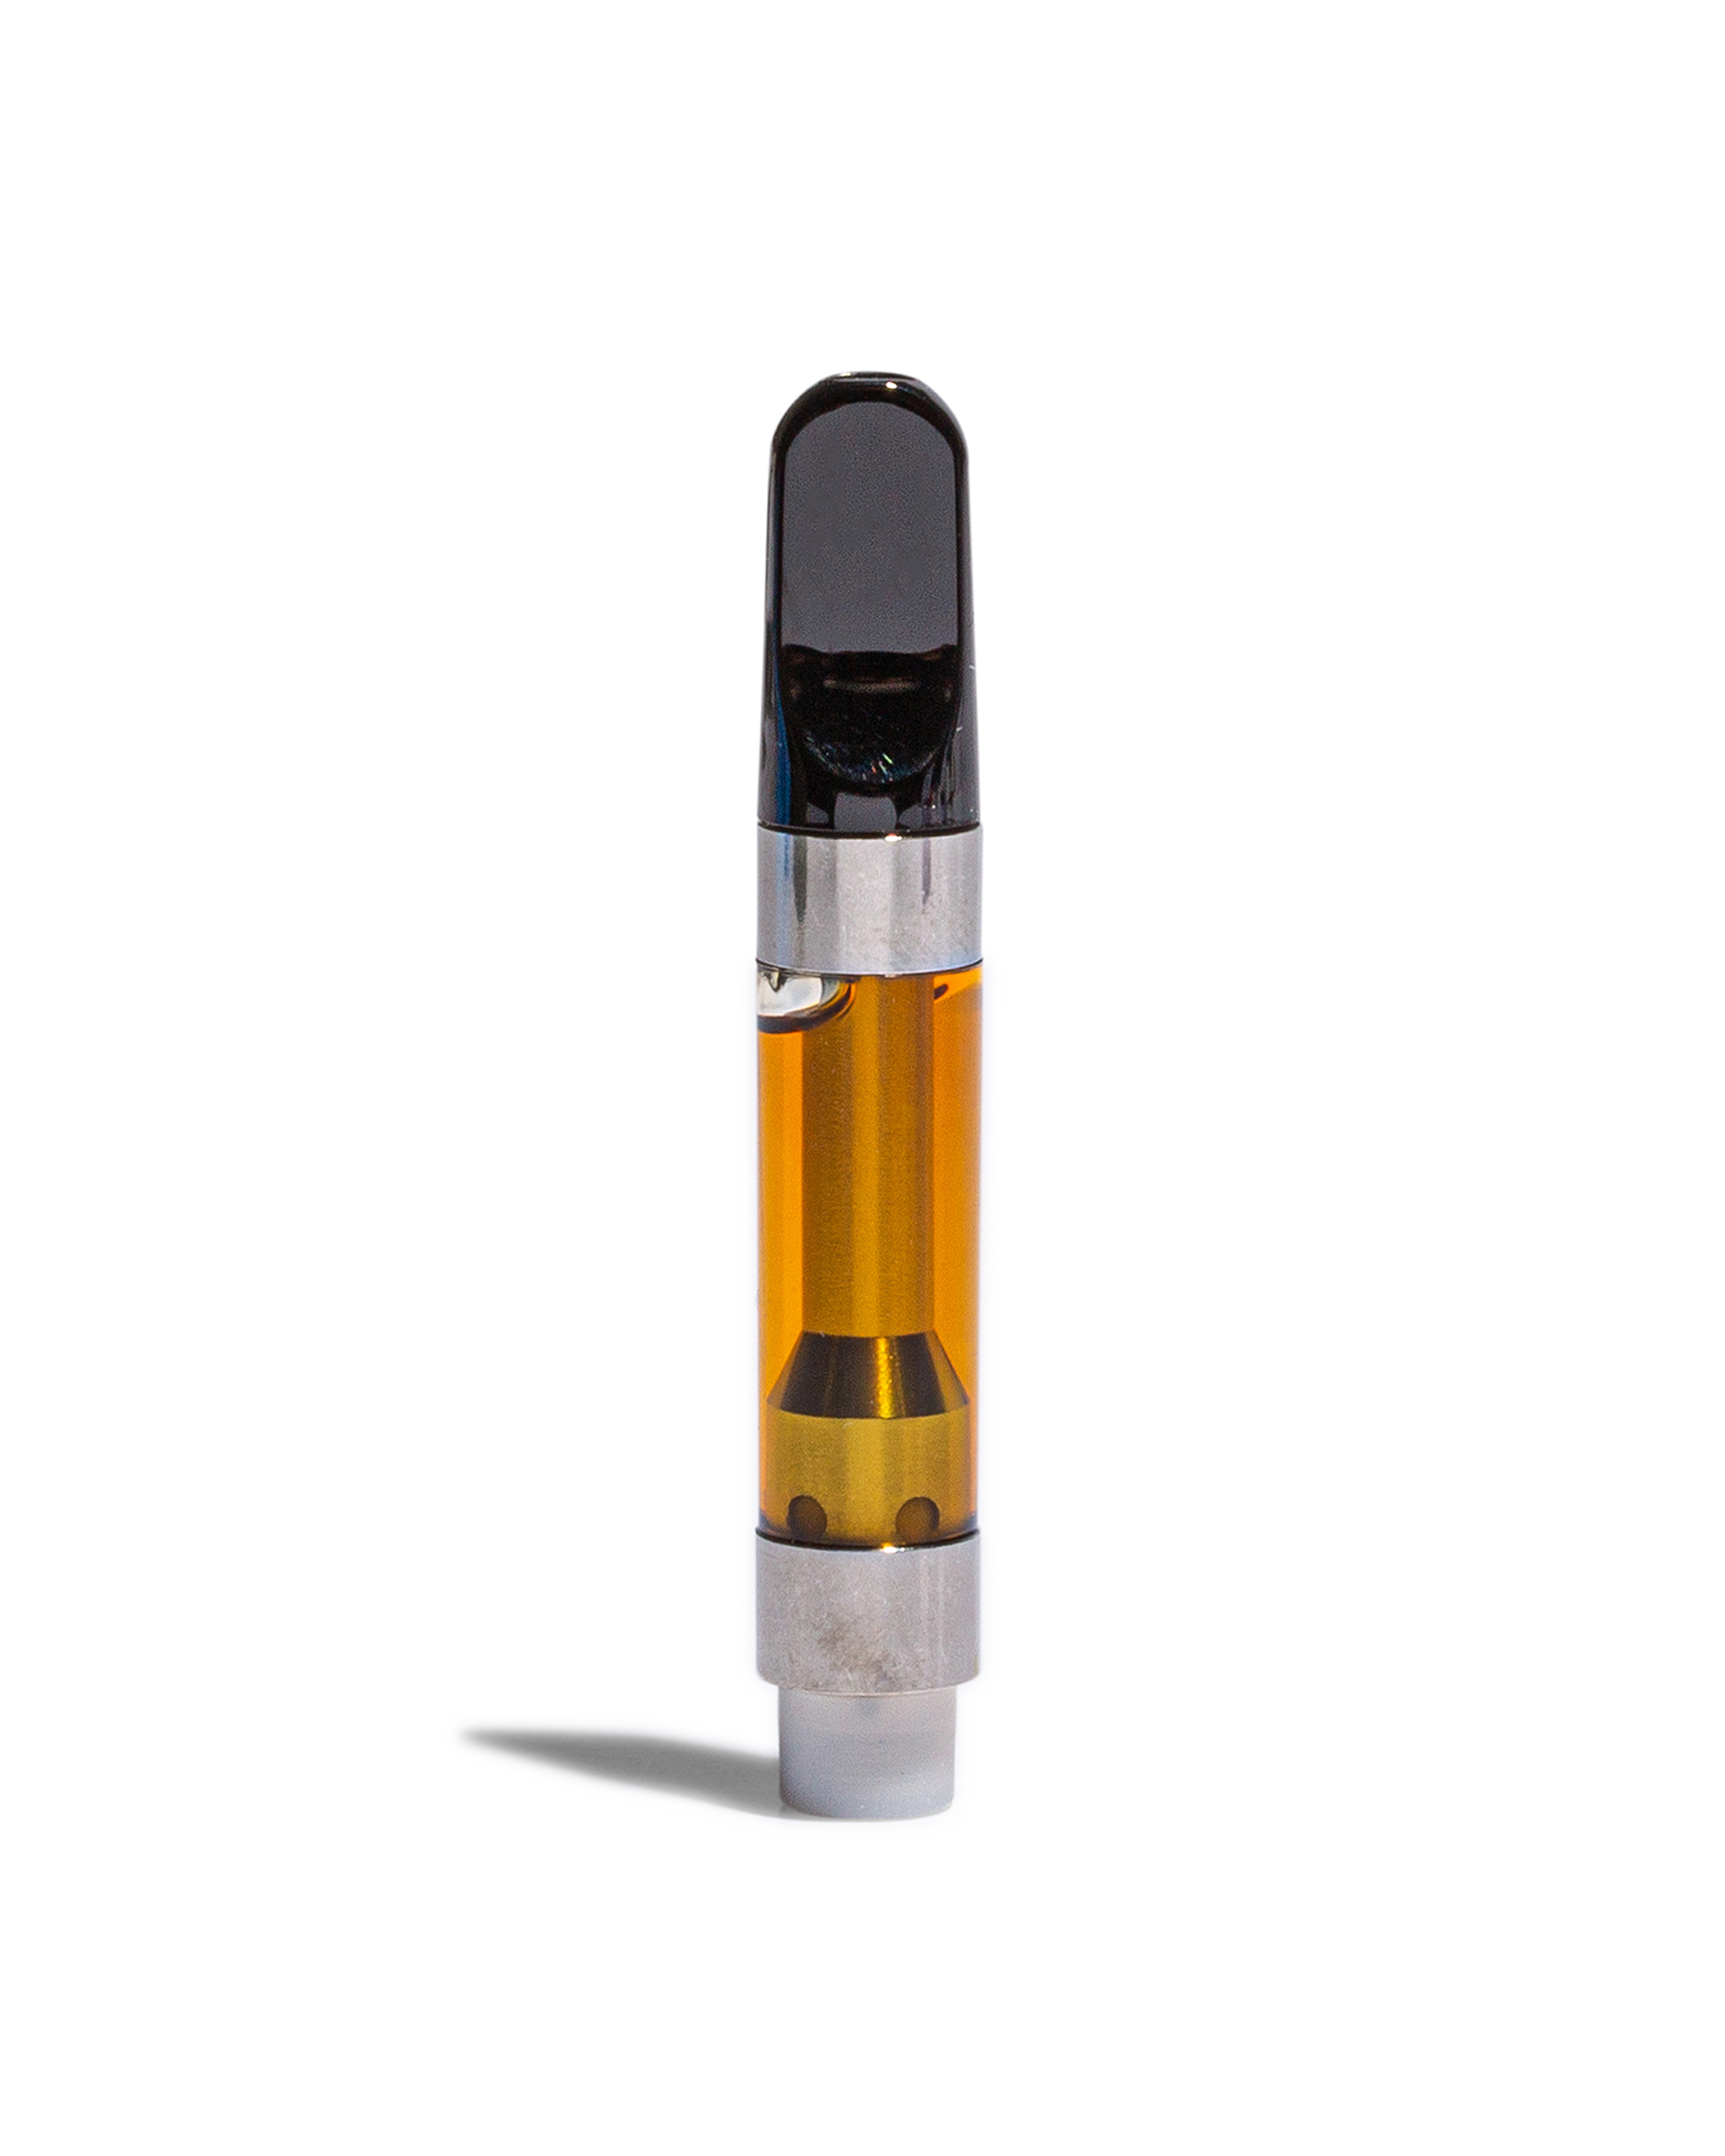 Party Time Live Resin Cart 1g